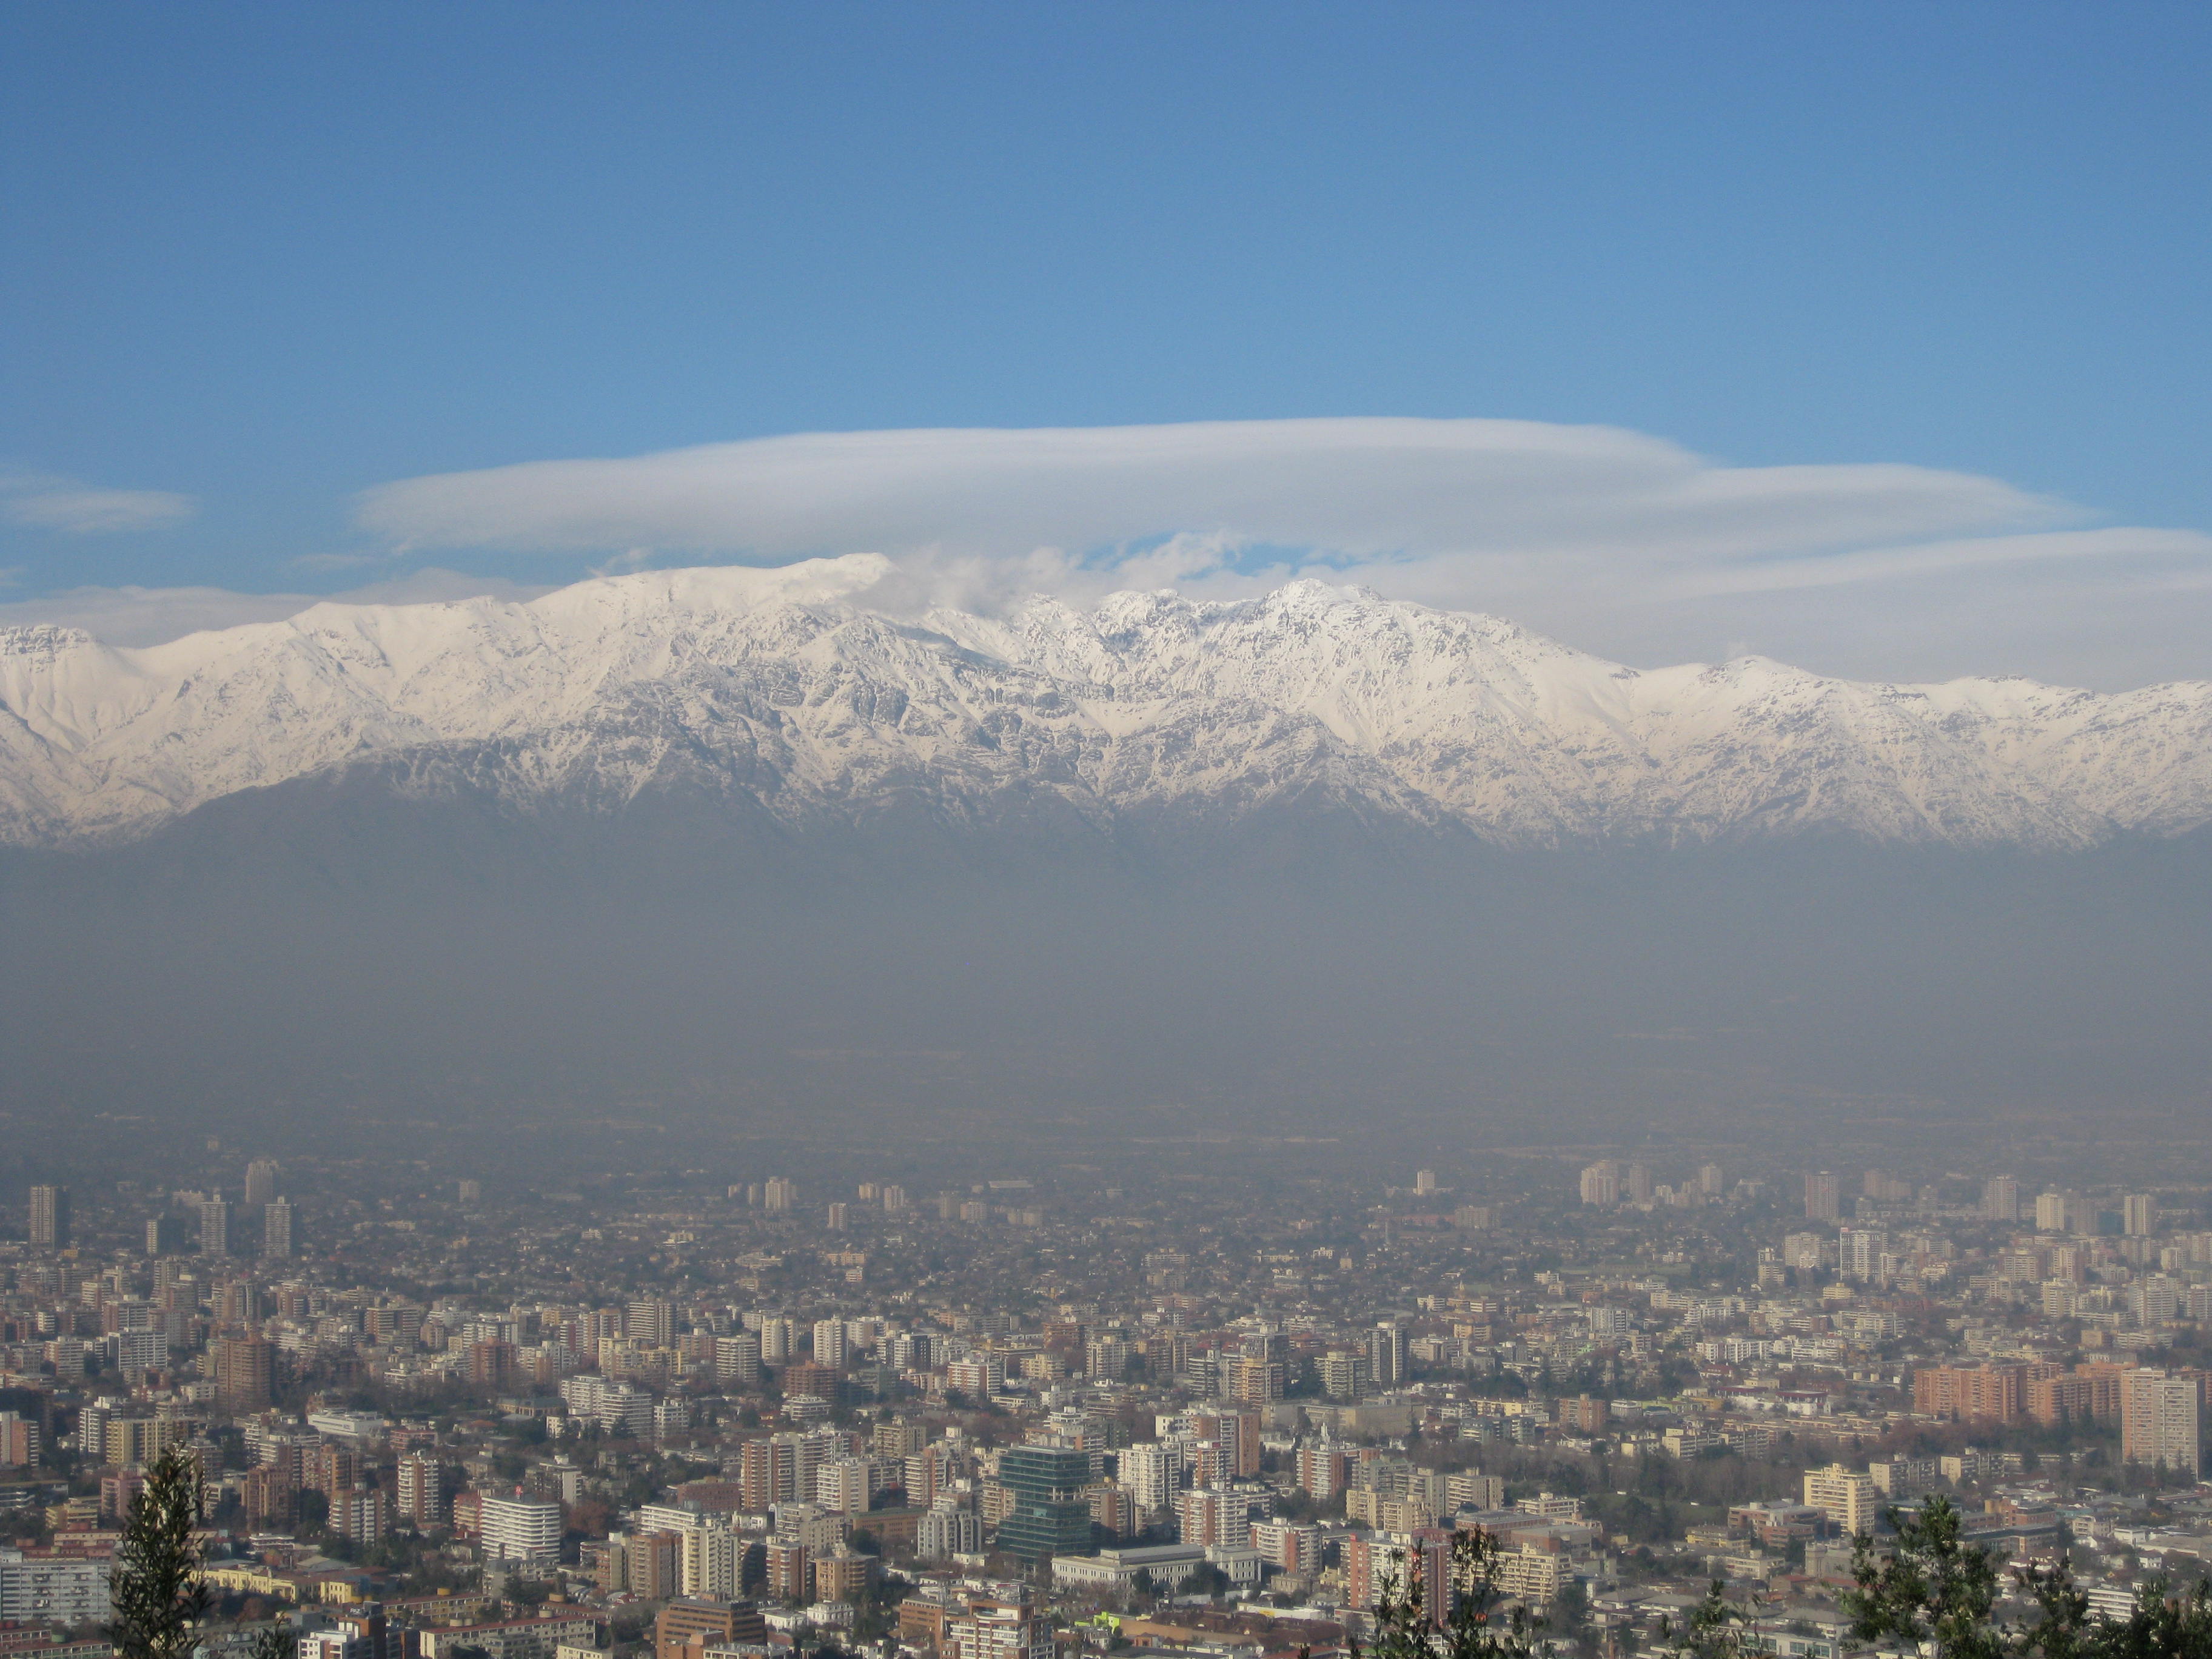 The city of Santiago and the Andes mountains 